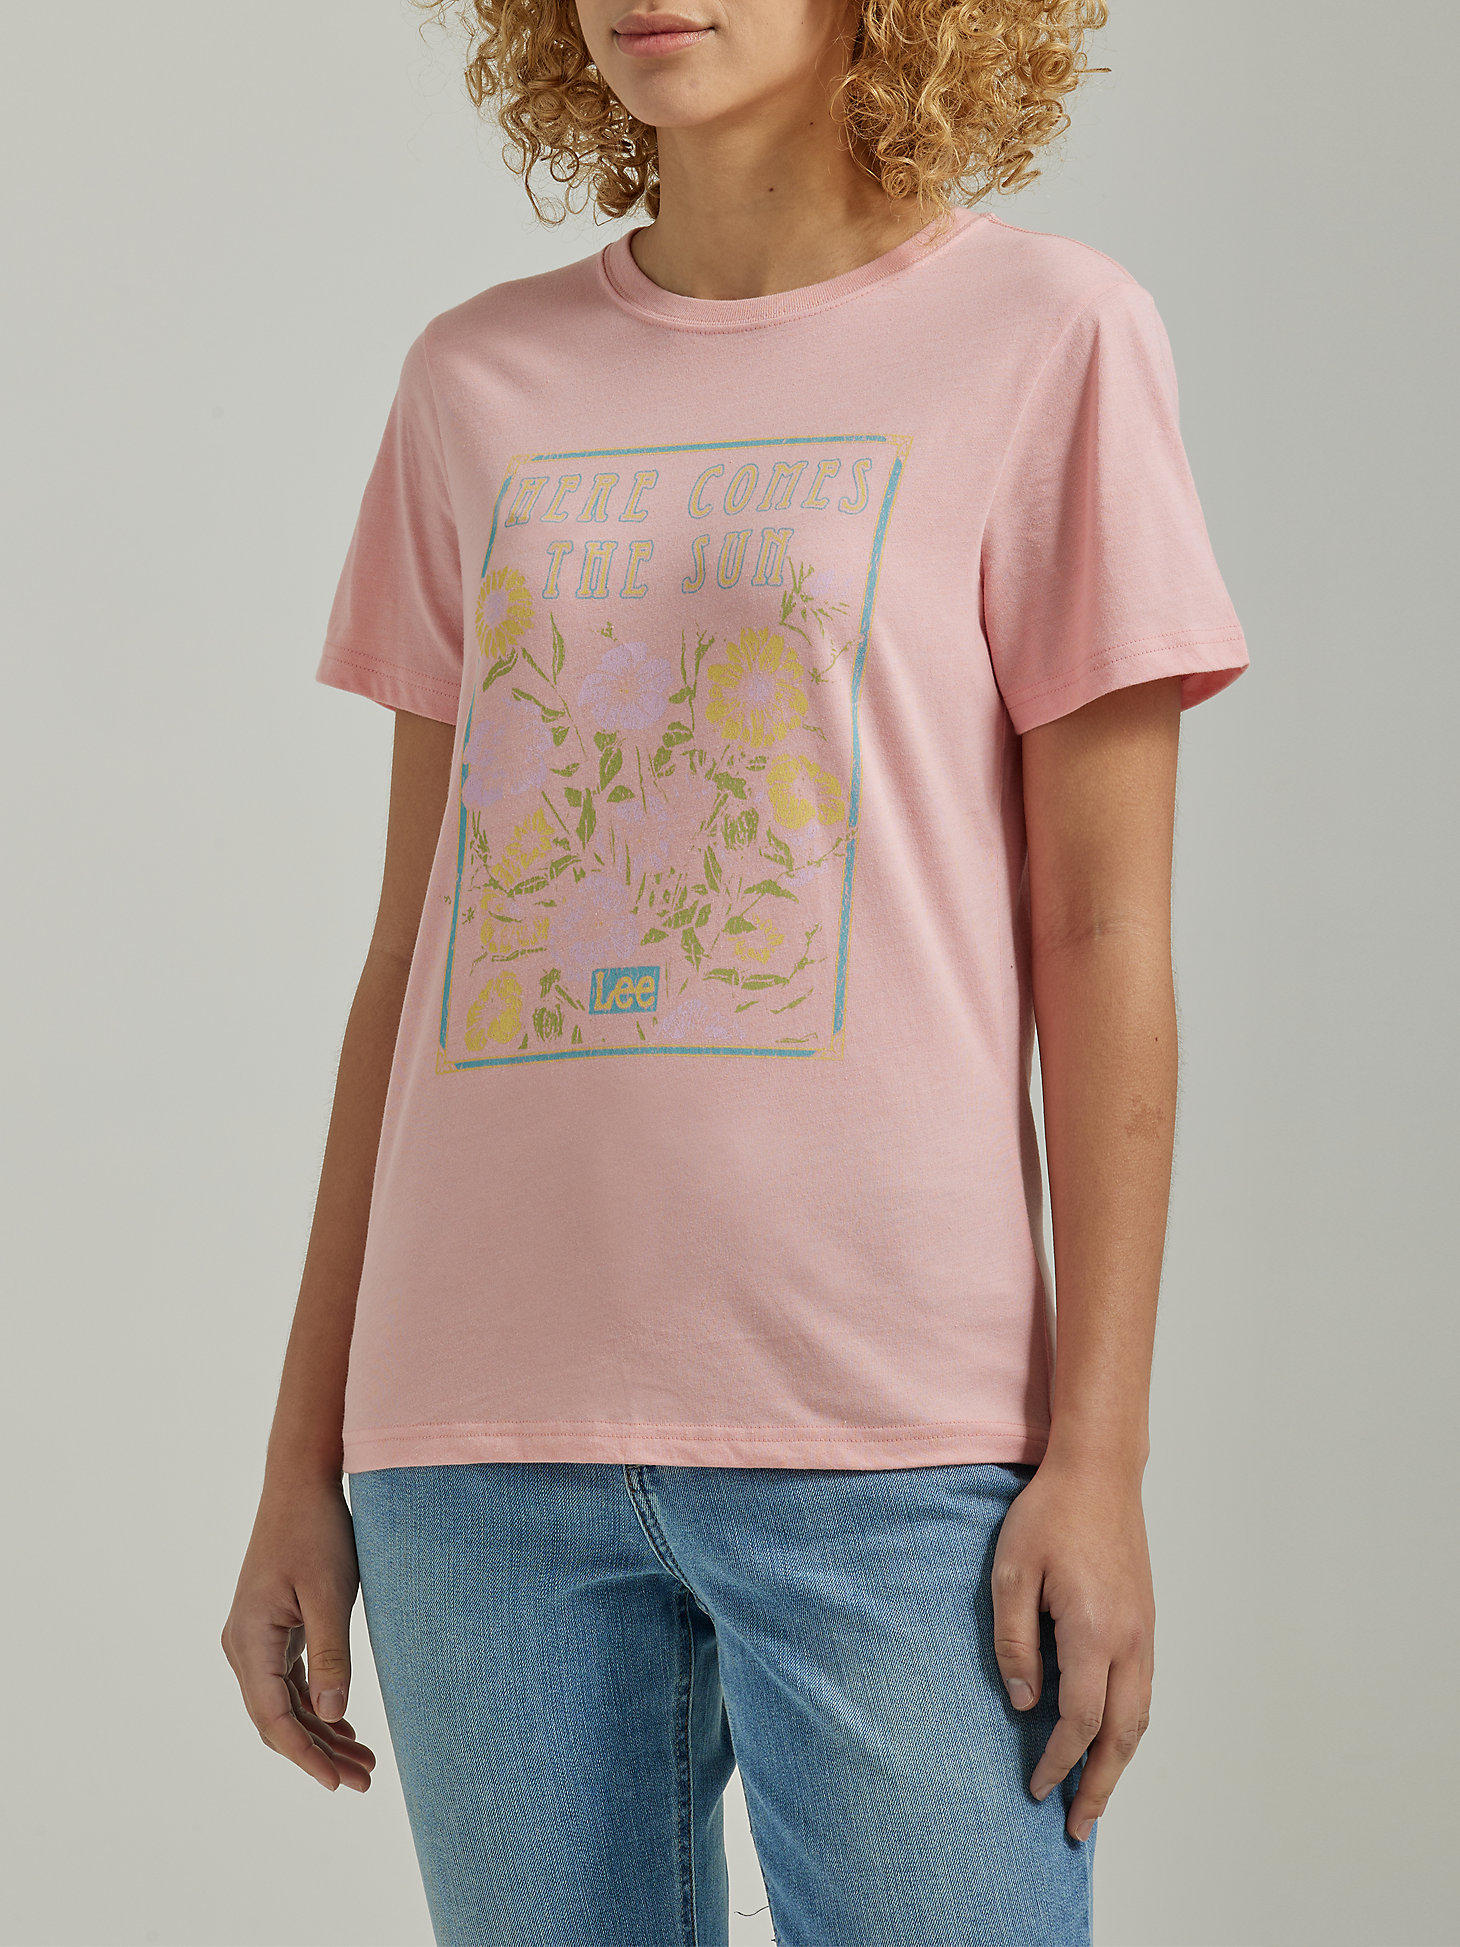 Women's Slim Fit Sun Flowers Graphic Tee in Pink Icing main view